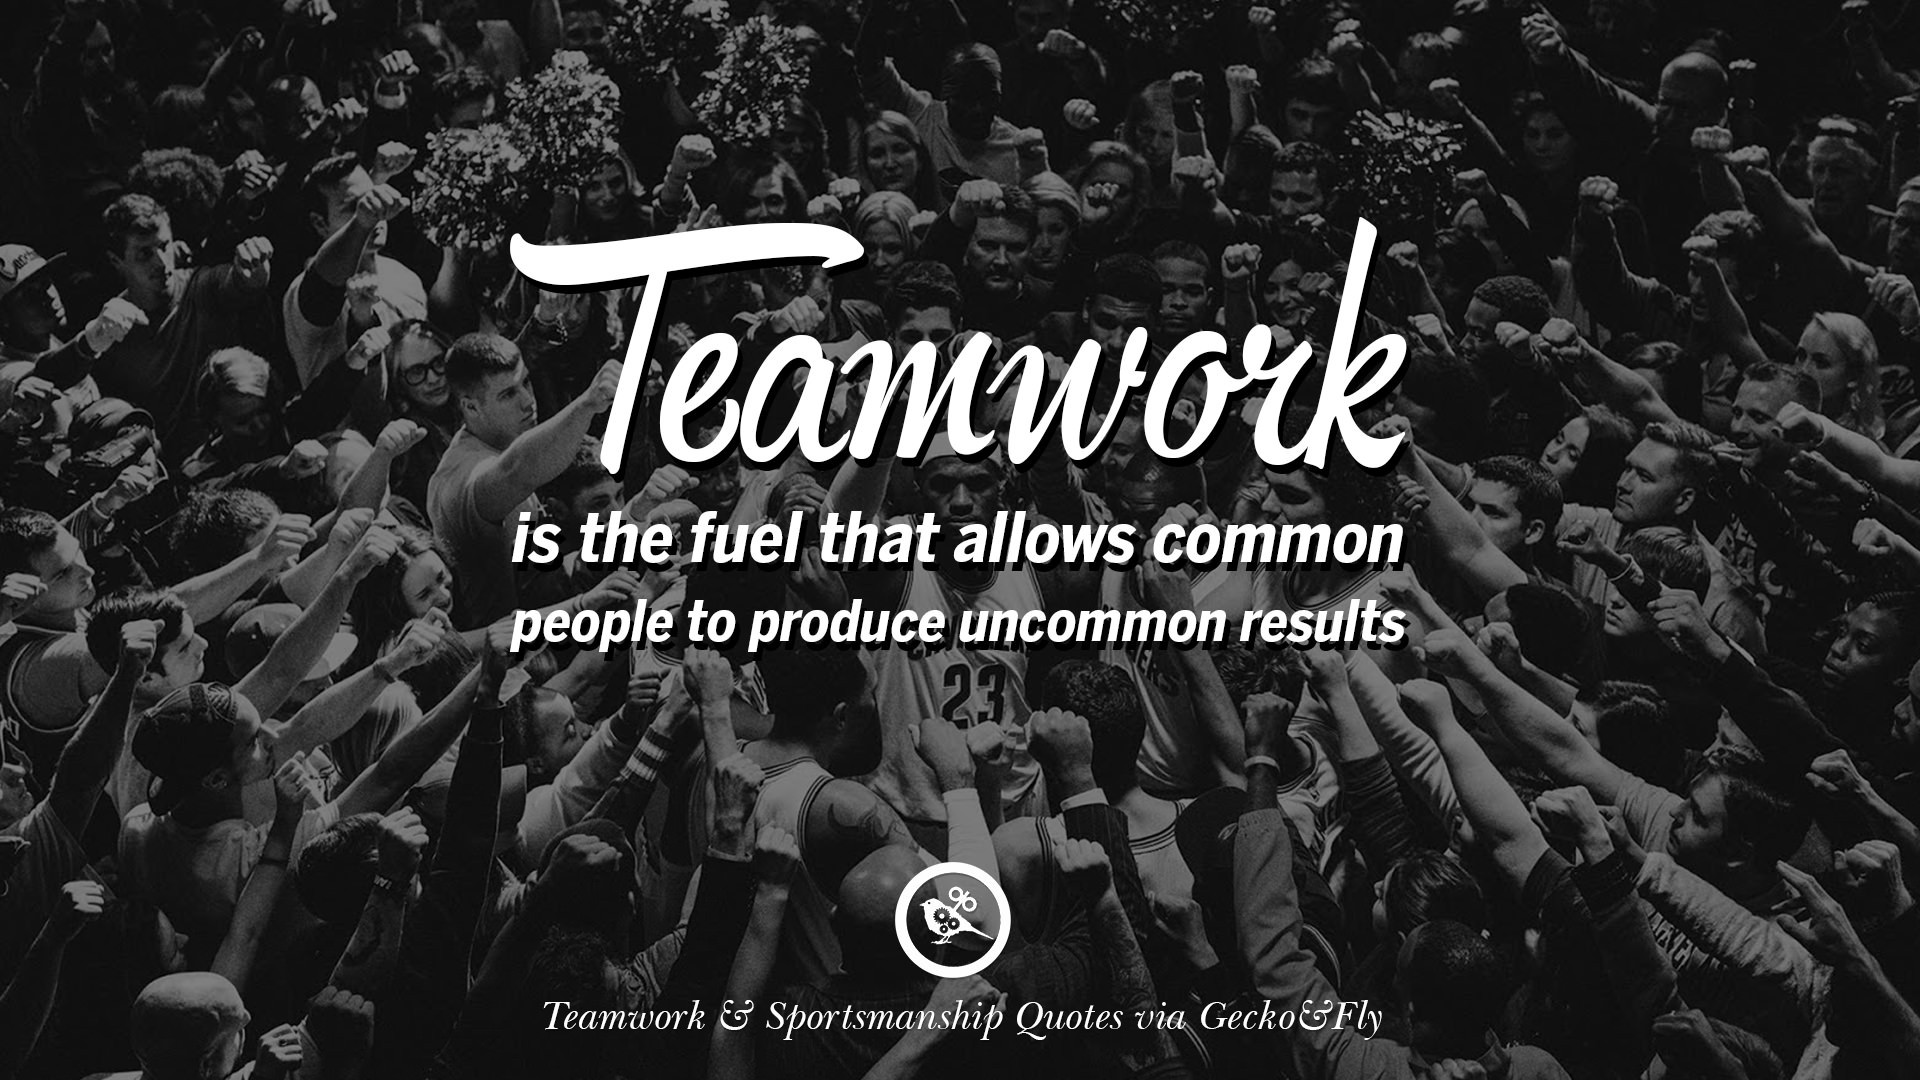 Motivational Teamwork Quotes
 50 Inspirational Quotes About Teamwork And Sportsmanship